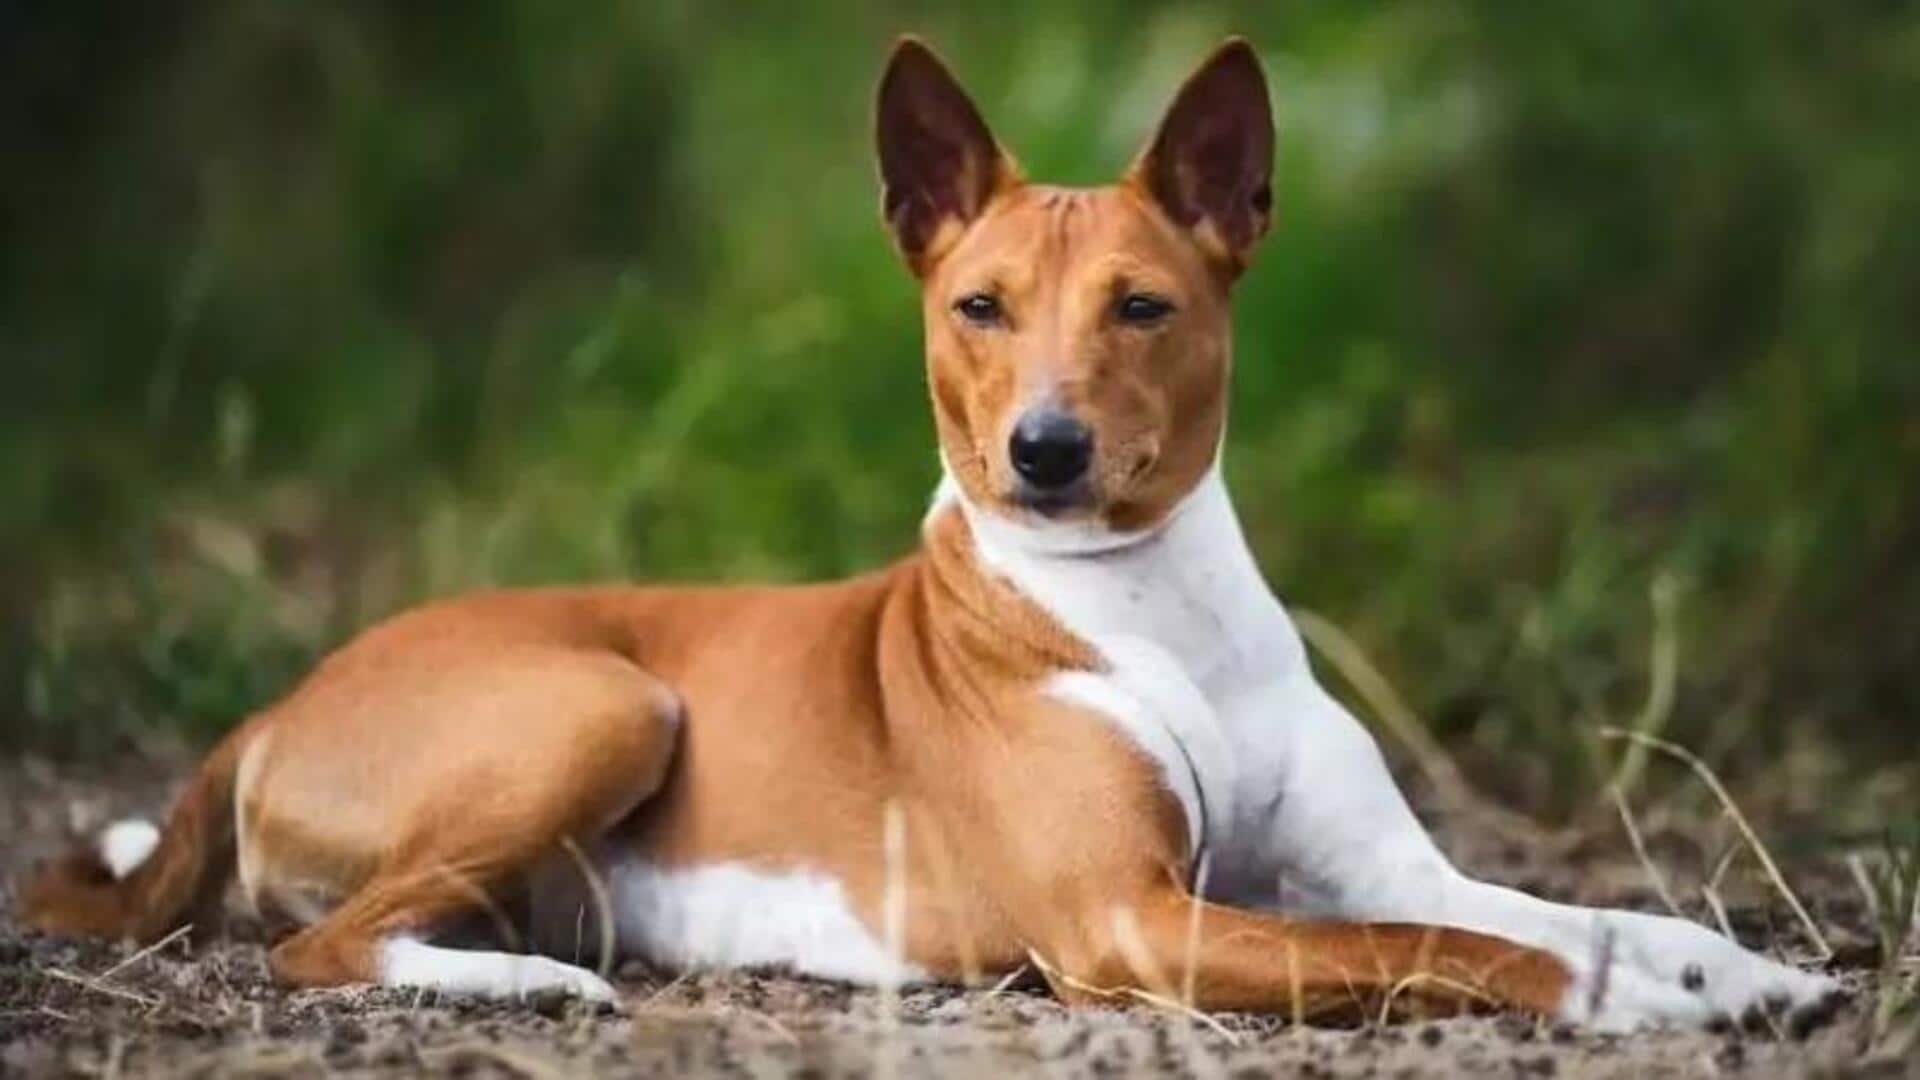 Hypoallergenic care tips for your Basenji